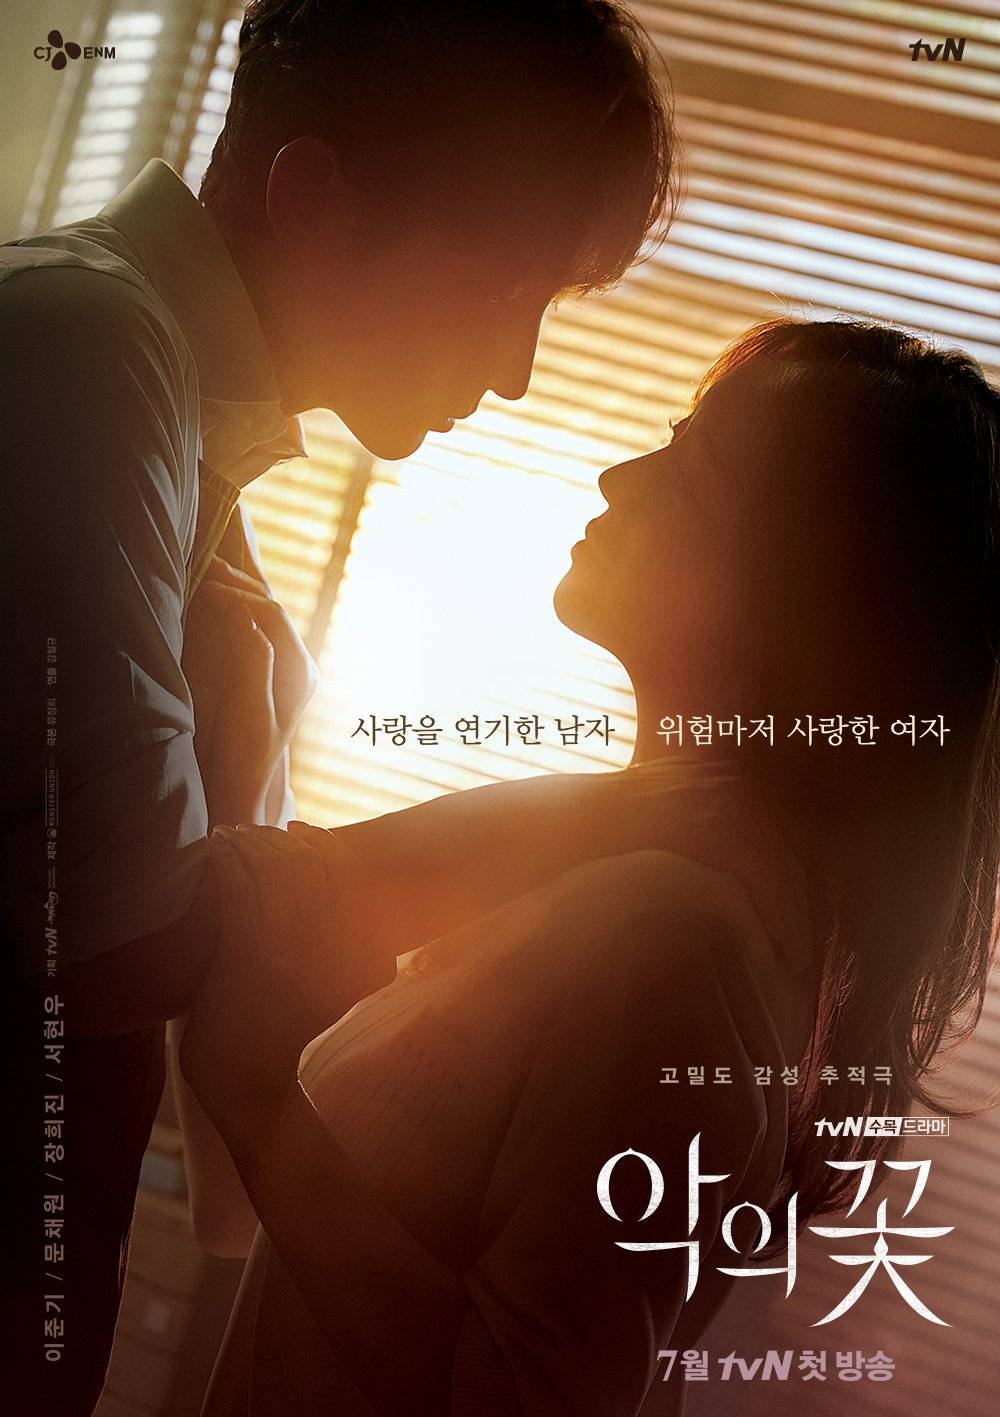 Lee Joon Gi And Moon Chae Wons Flower Of Evil Releases Main Posters Hancinema The Korean 1695